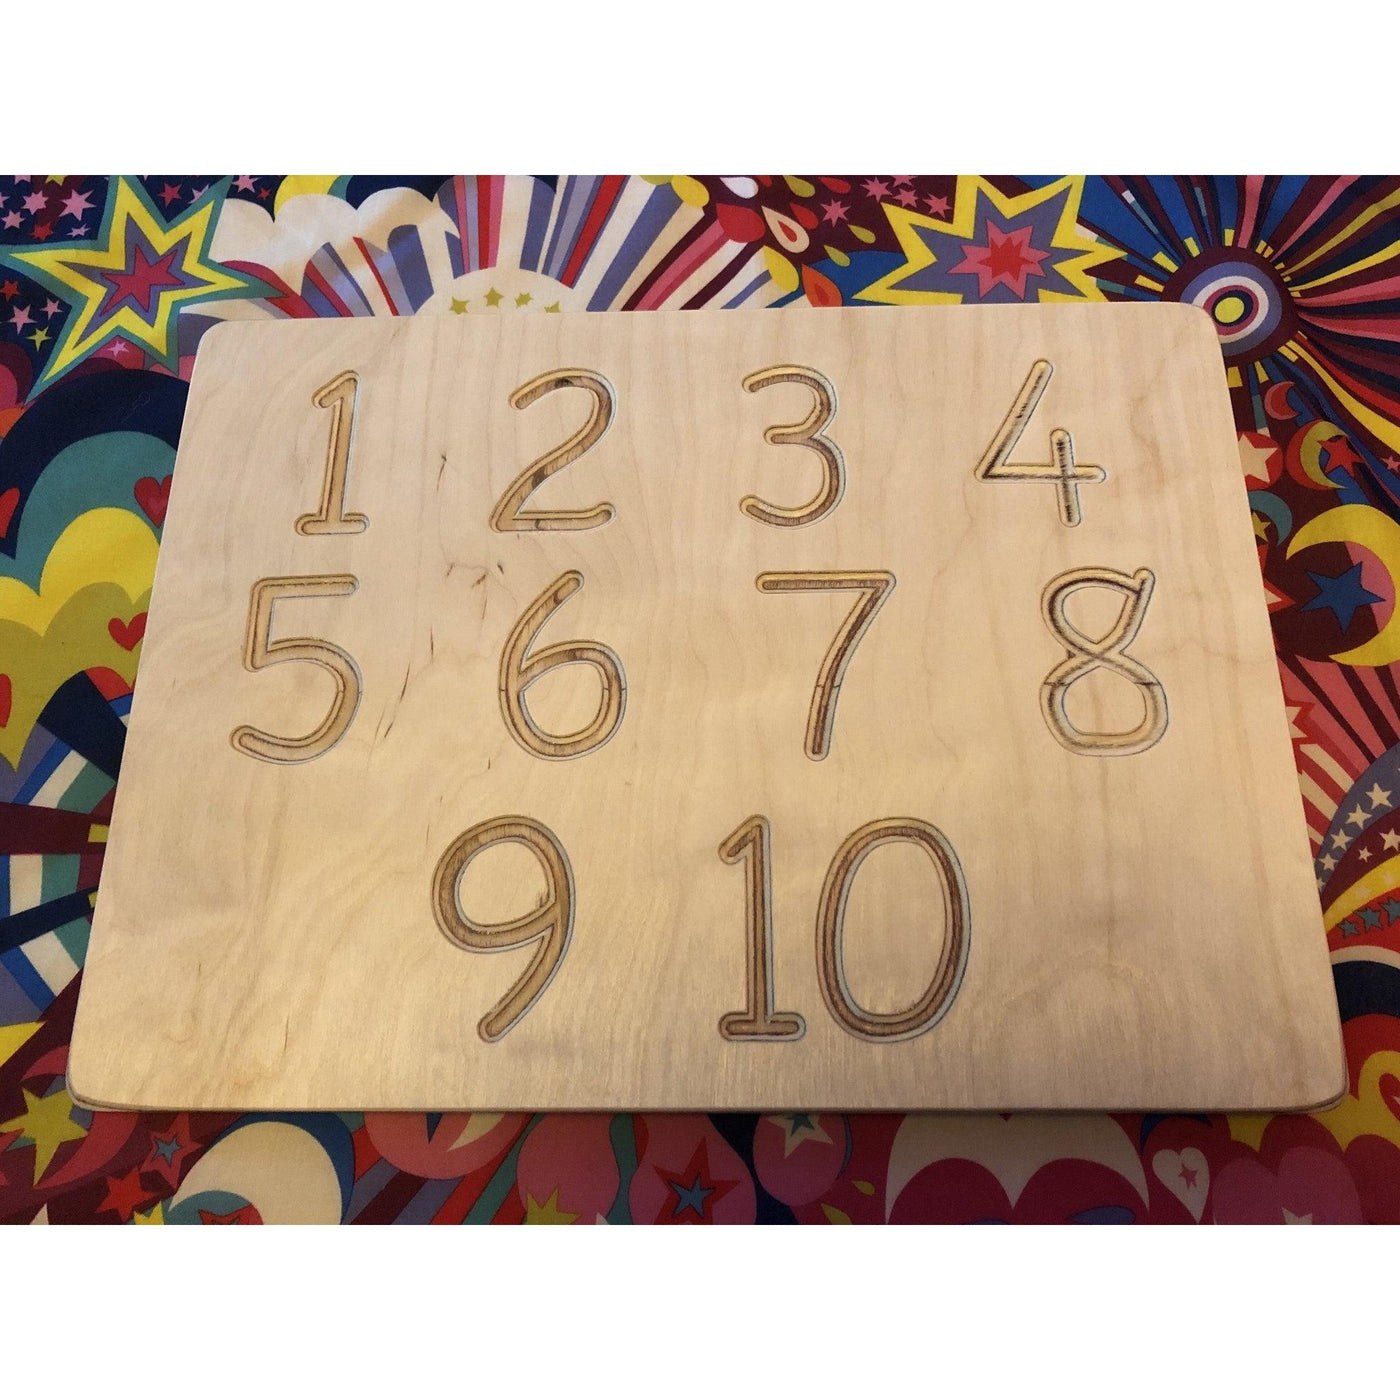 Sawdust & Rainbows 1-10 Number Wooden Tracing Board